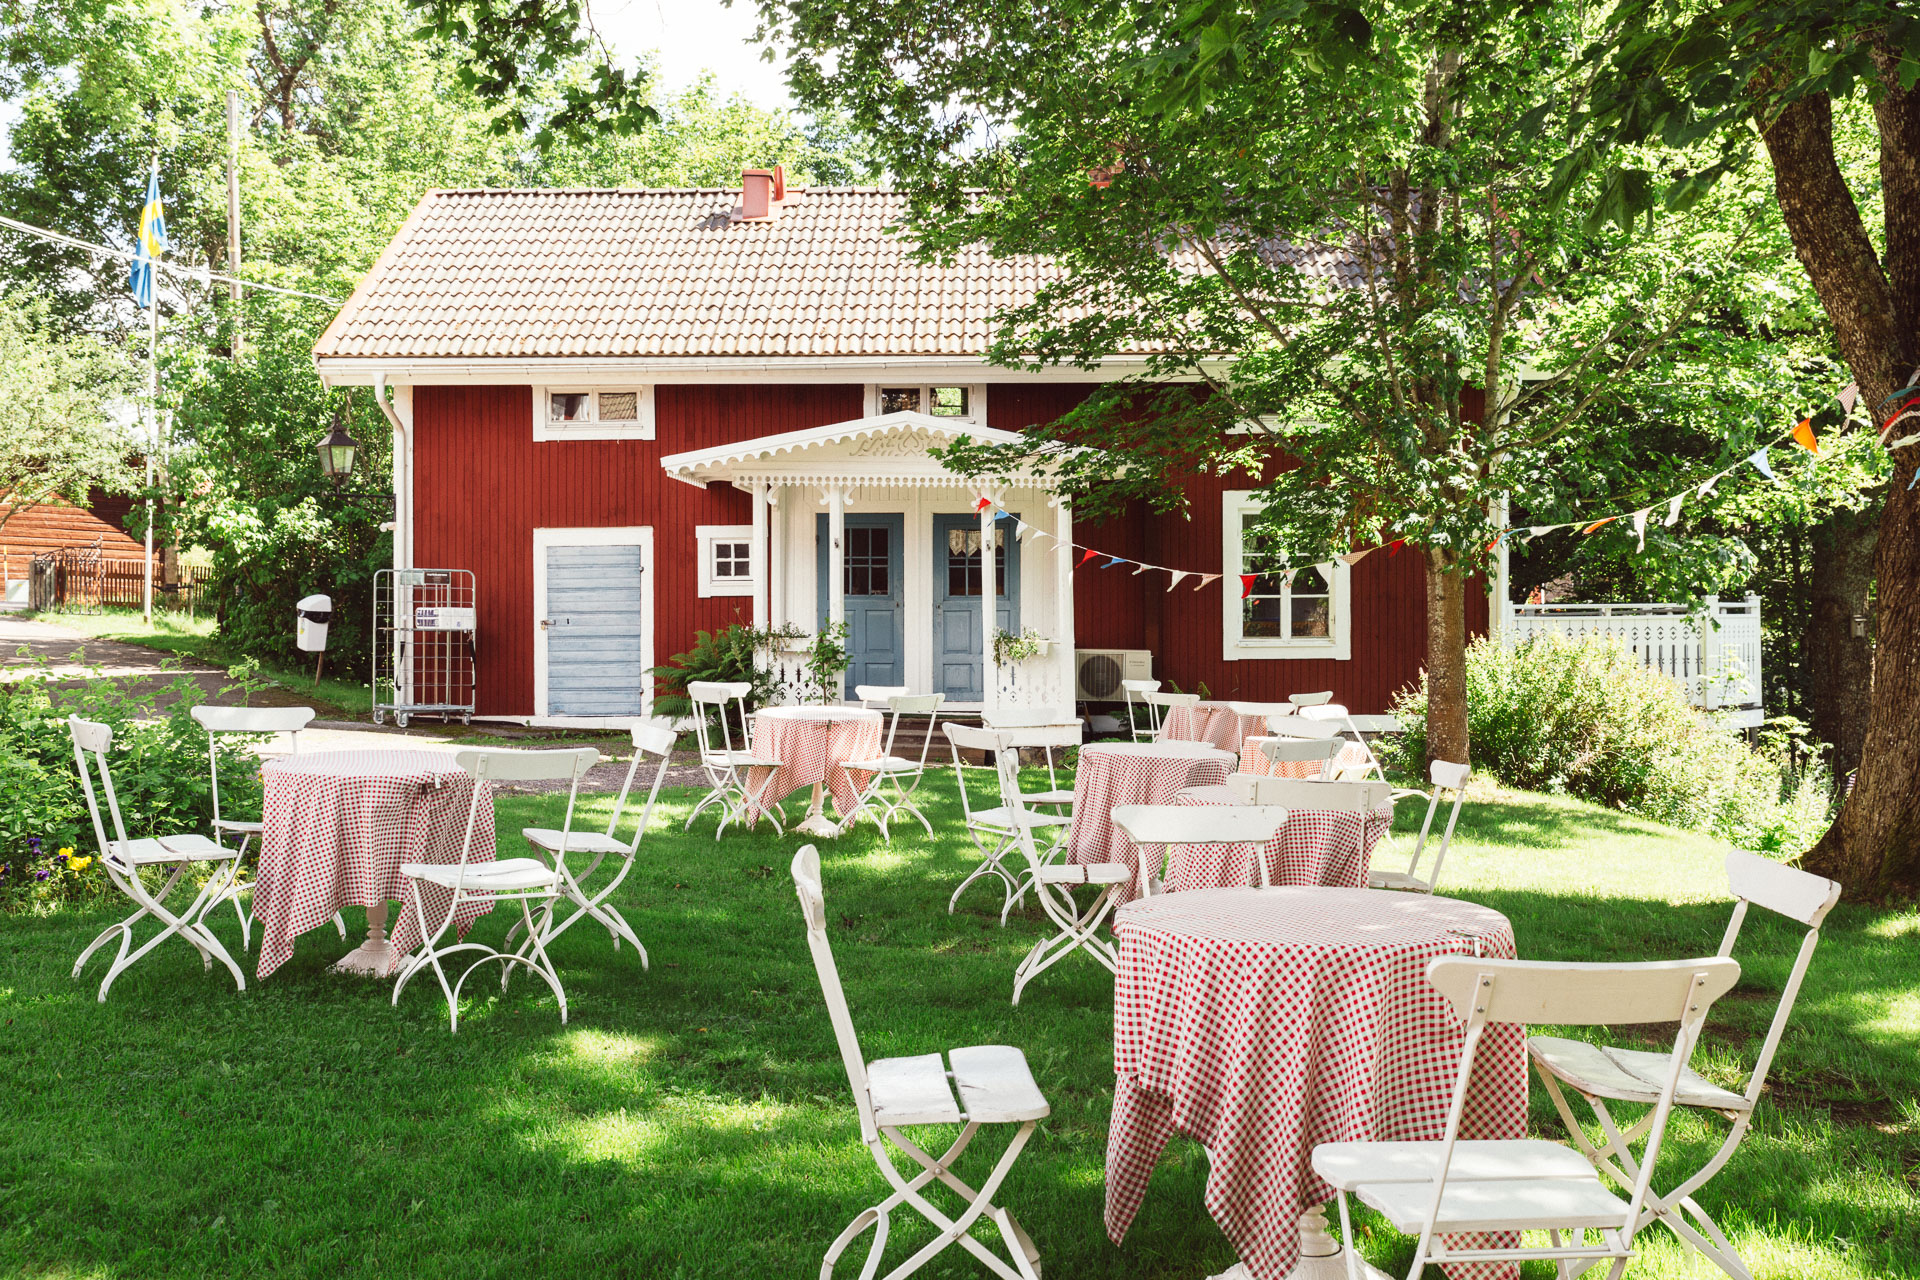 The color of this house (and many others in Sweden!) is called falu red.